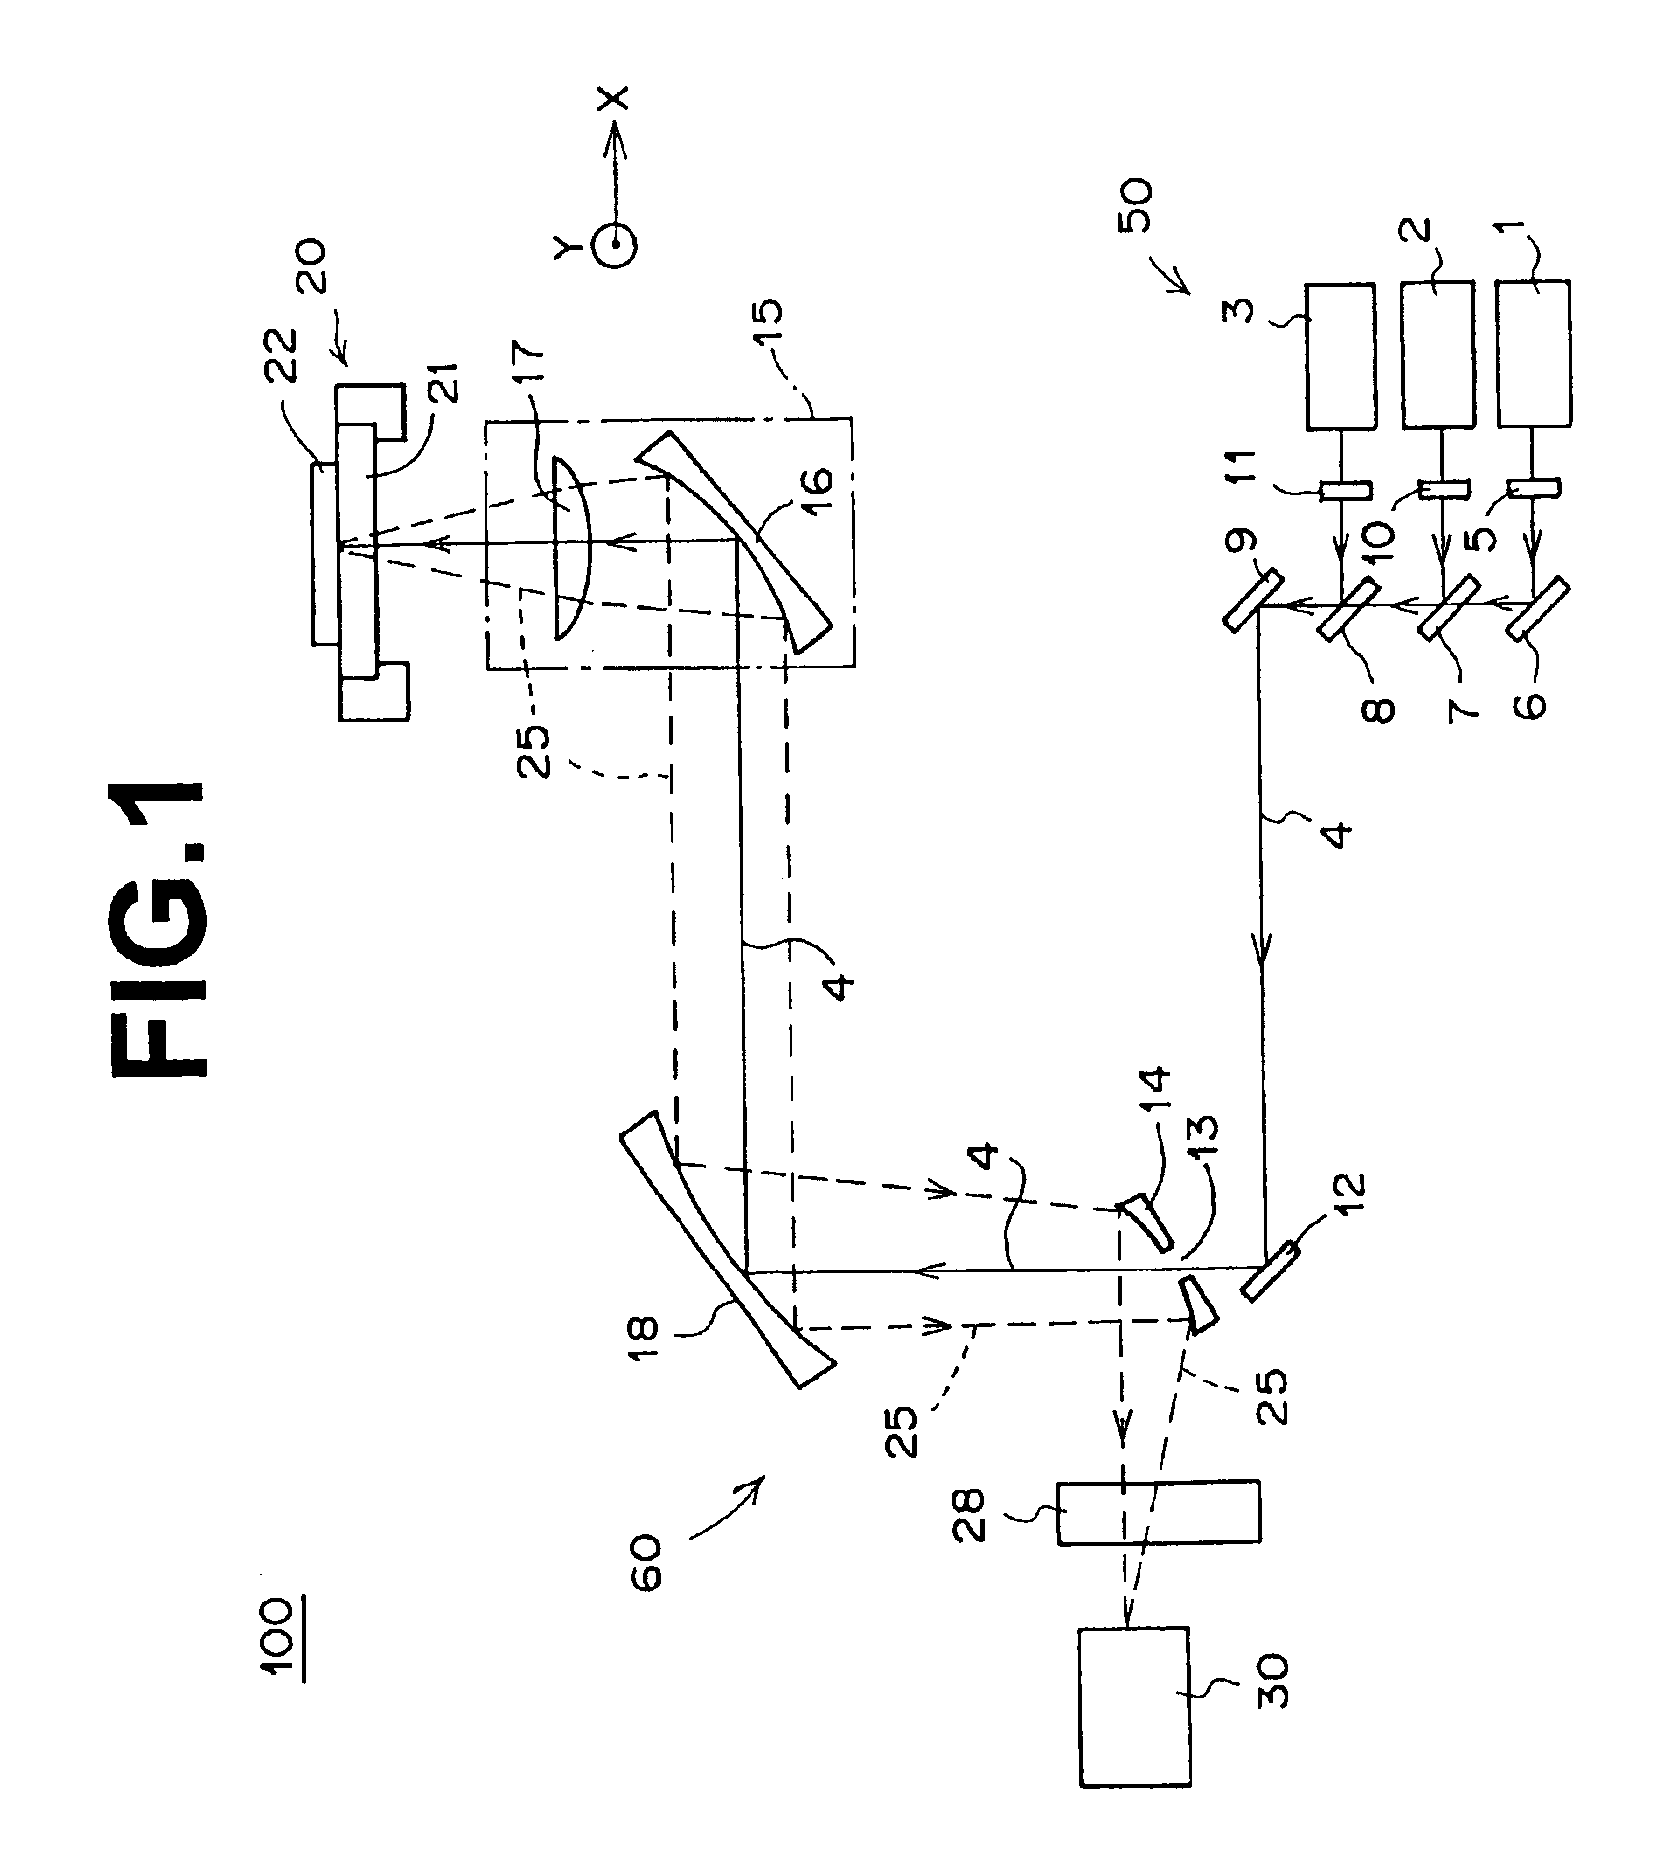 Image read-out method and apparatus